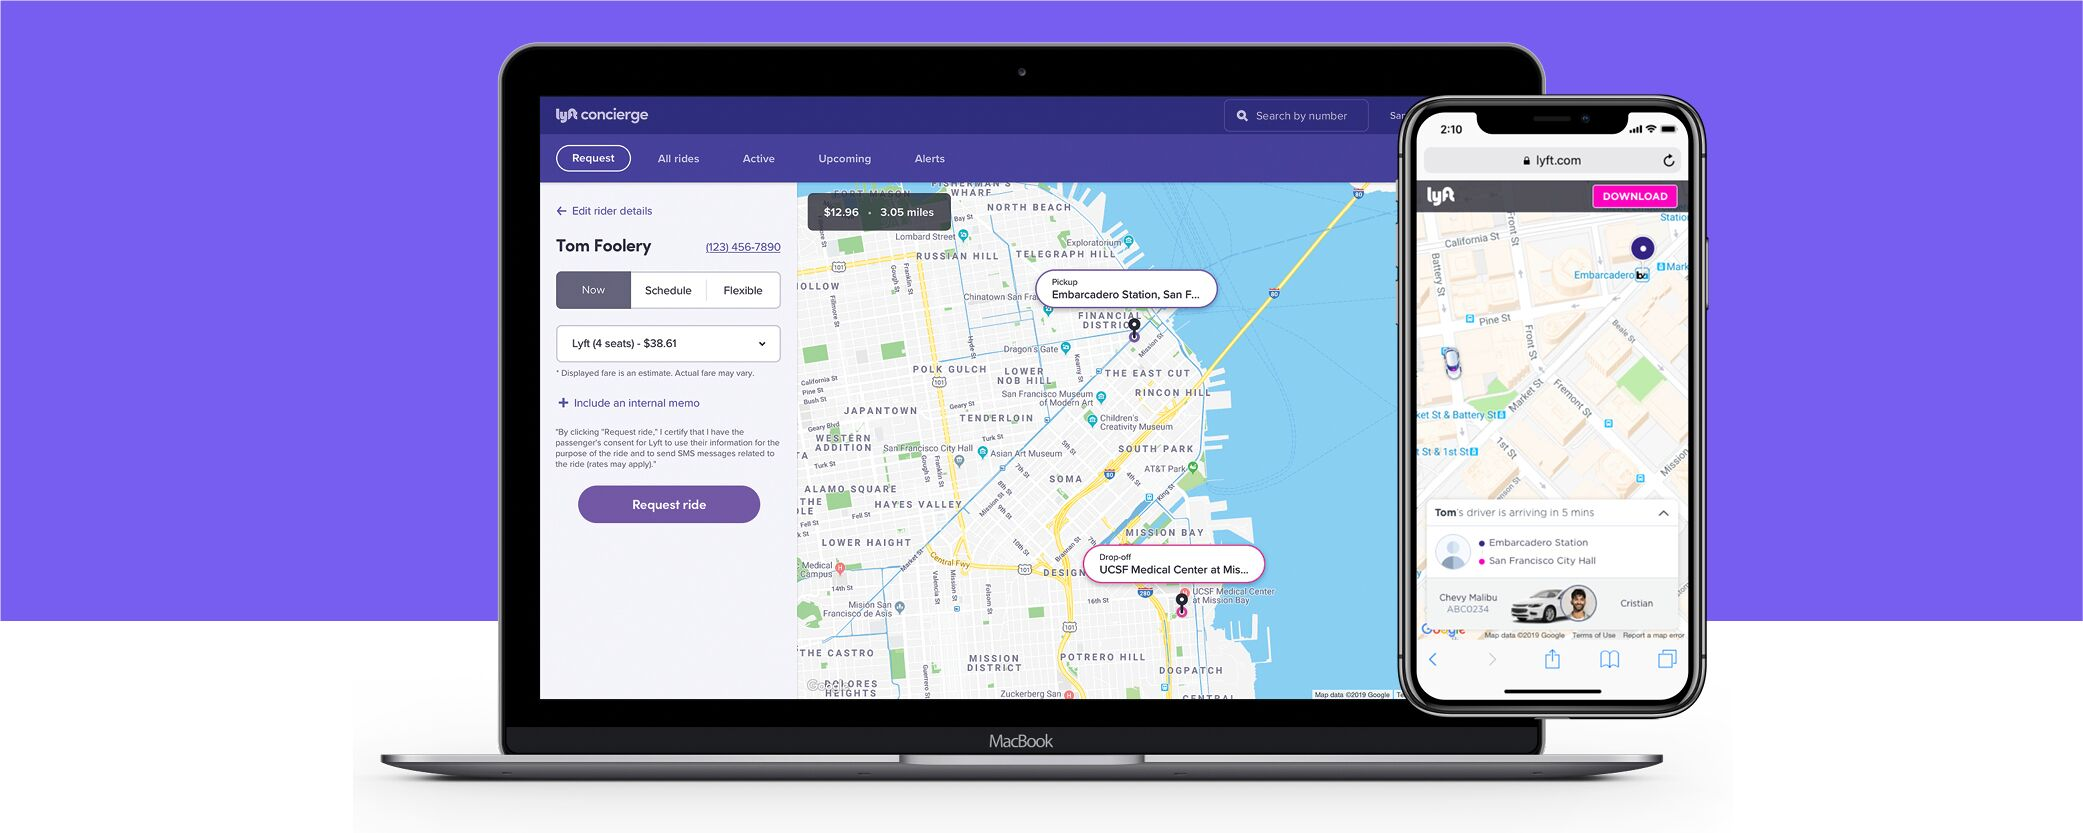 A Lyft Concierge product shot that shows a map with pick up and drop-off locations for a healthcare customer.